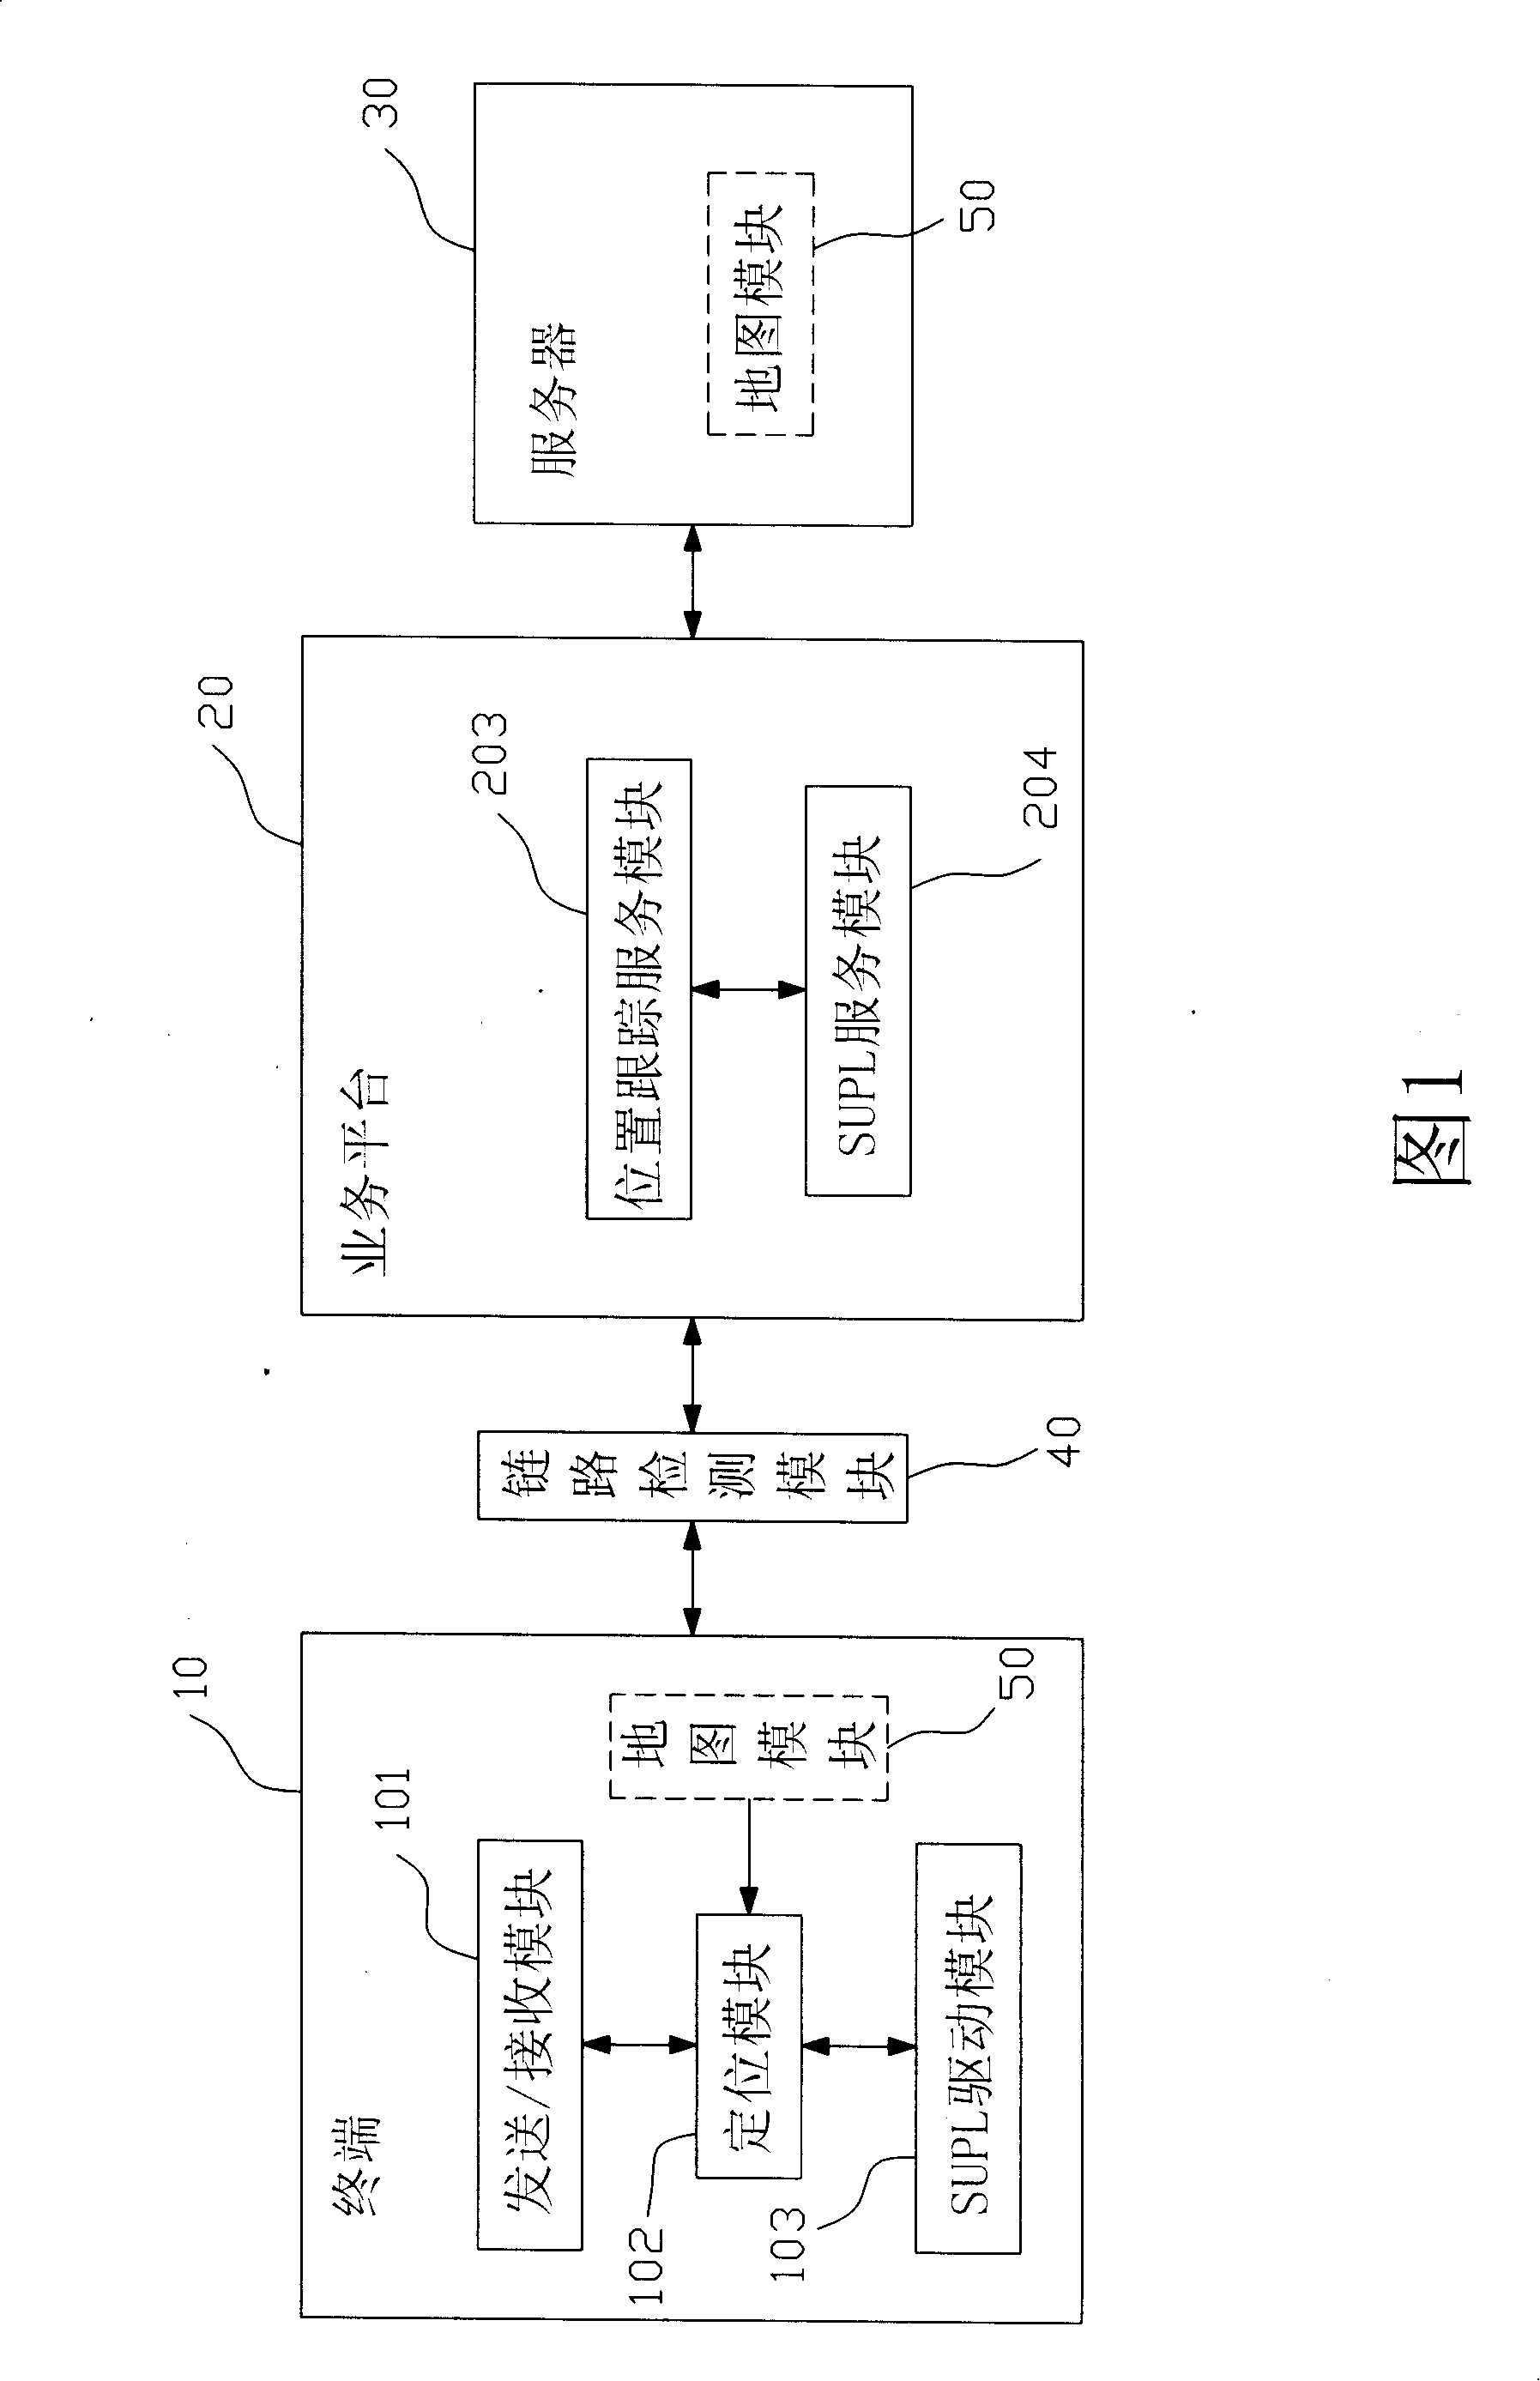 Method and system for tracing AGPS location